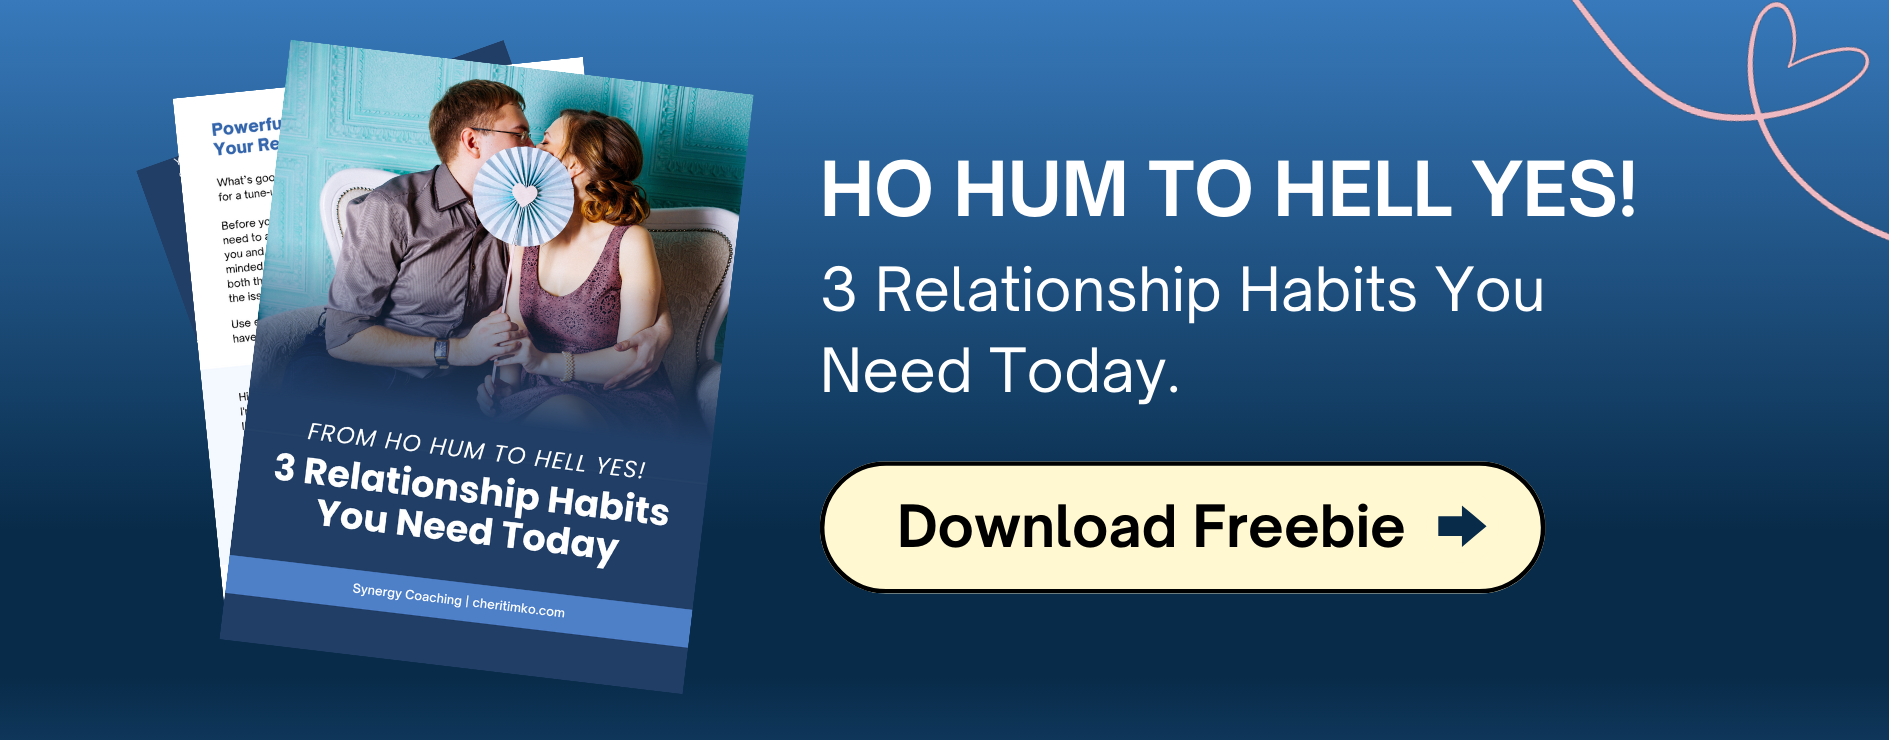 Ho Hum to Hell Yes 3 Relationship Habits You Need Today e1707775961388